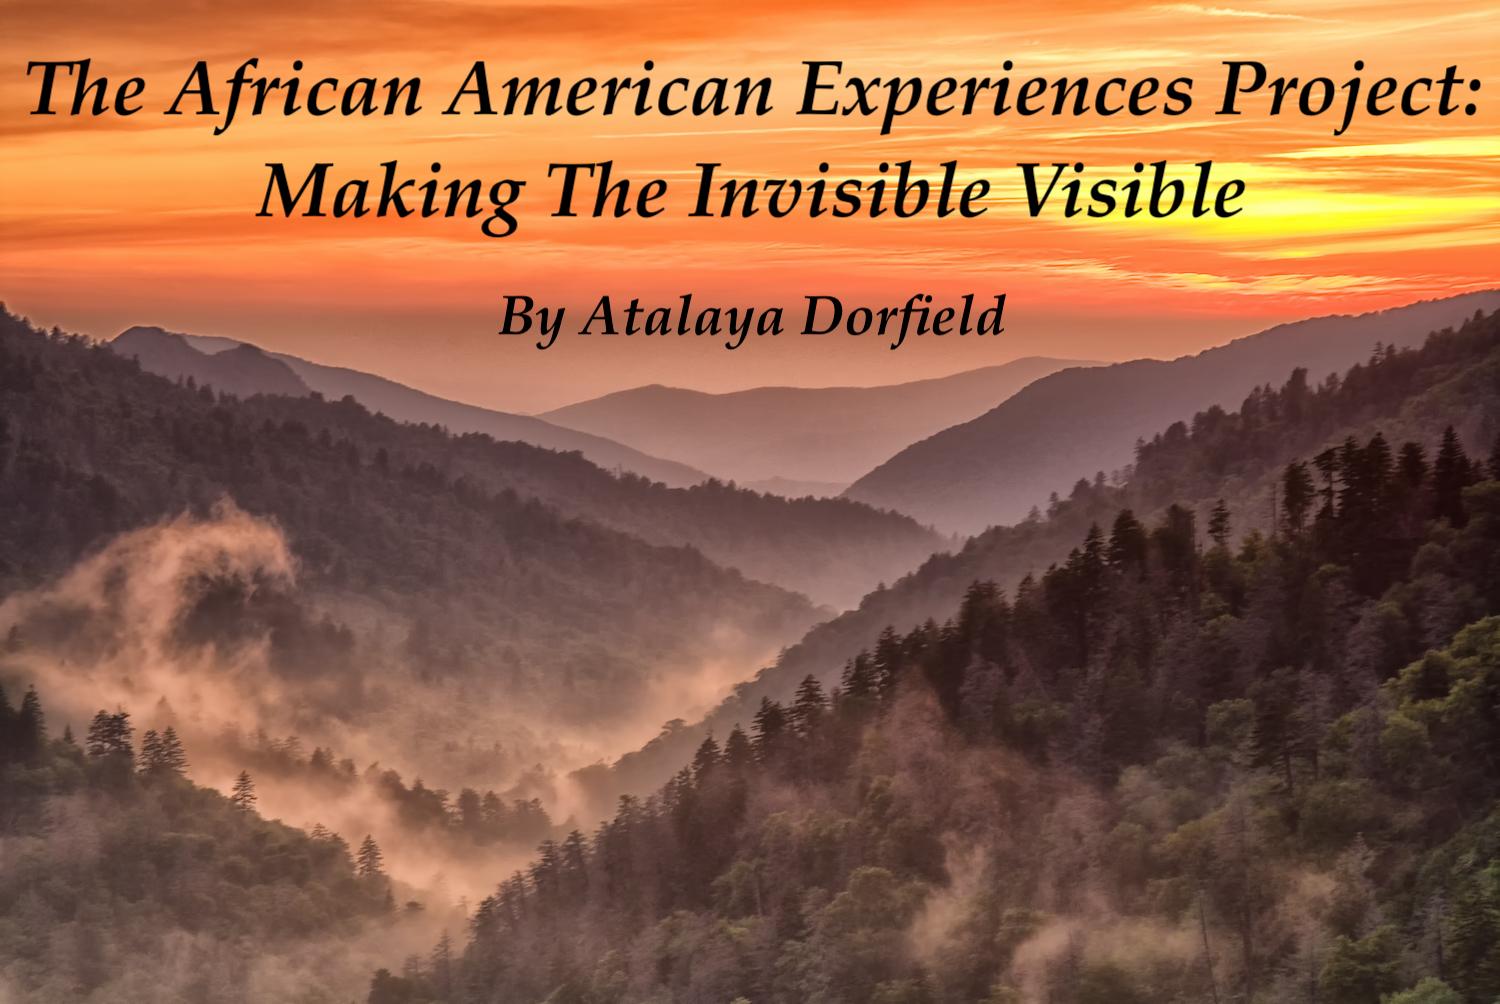  The African American Experiences Project: Making the Invisible Visible